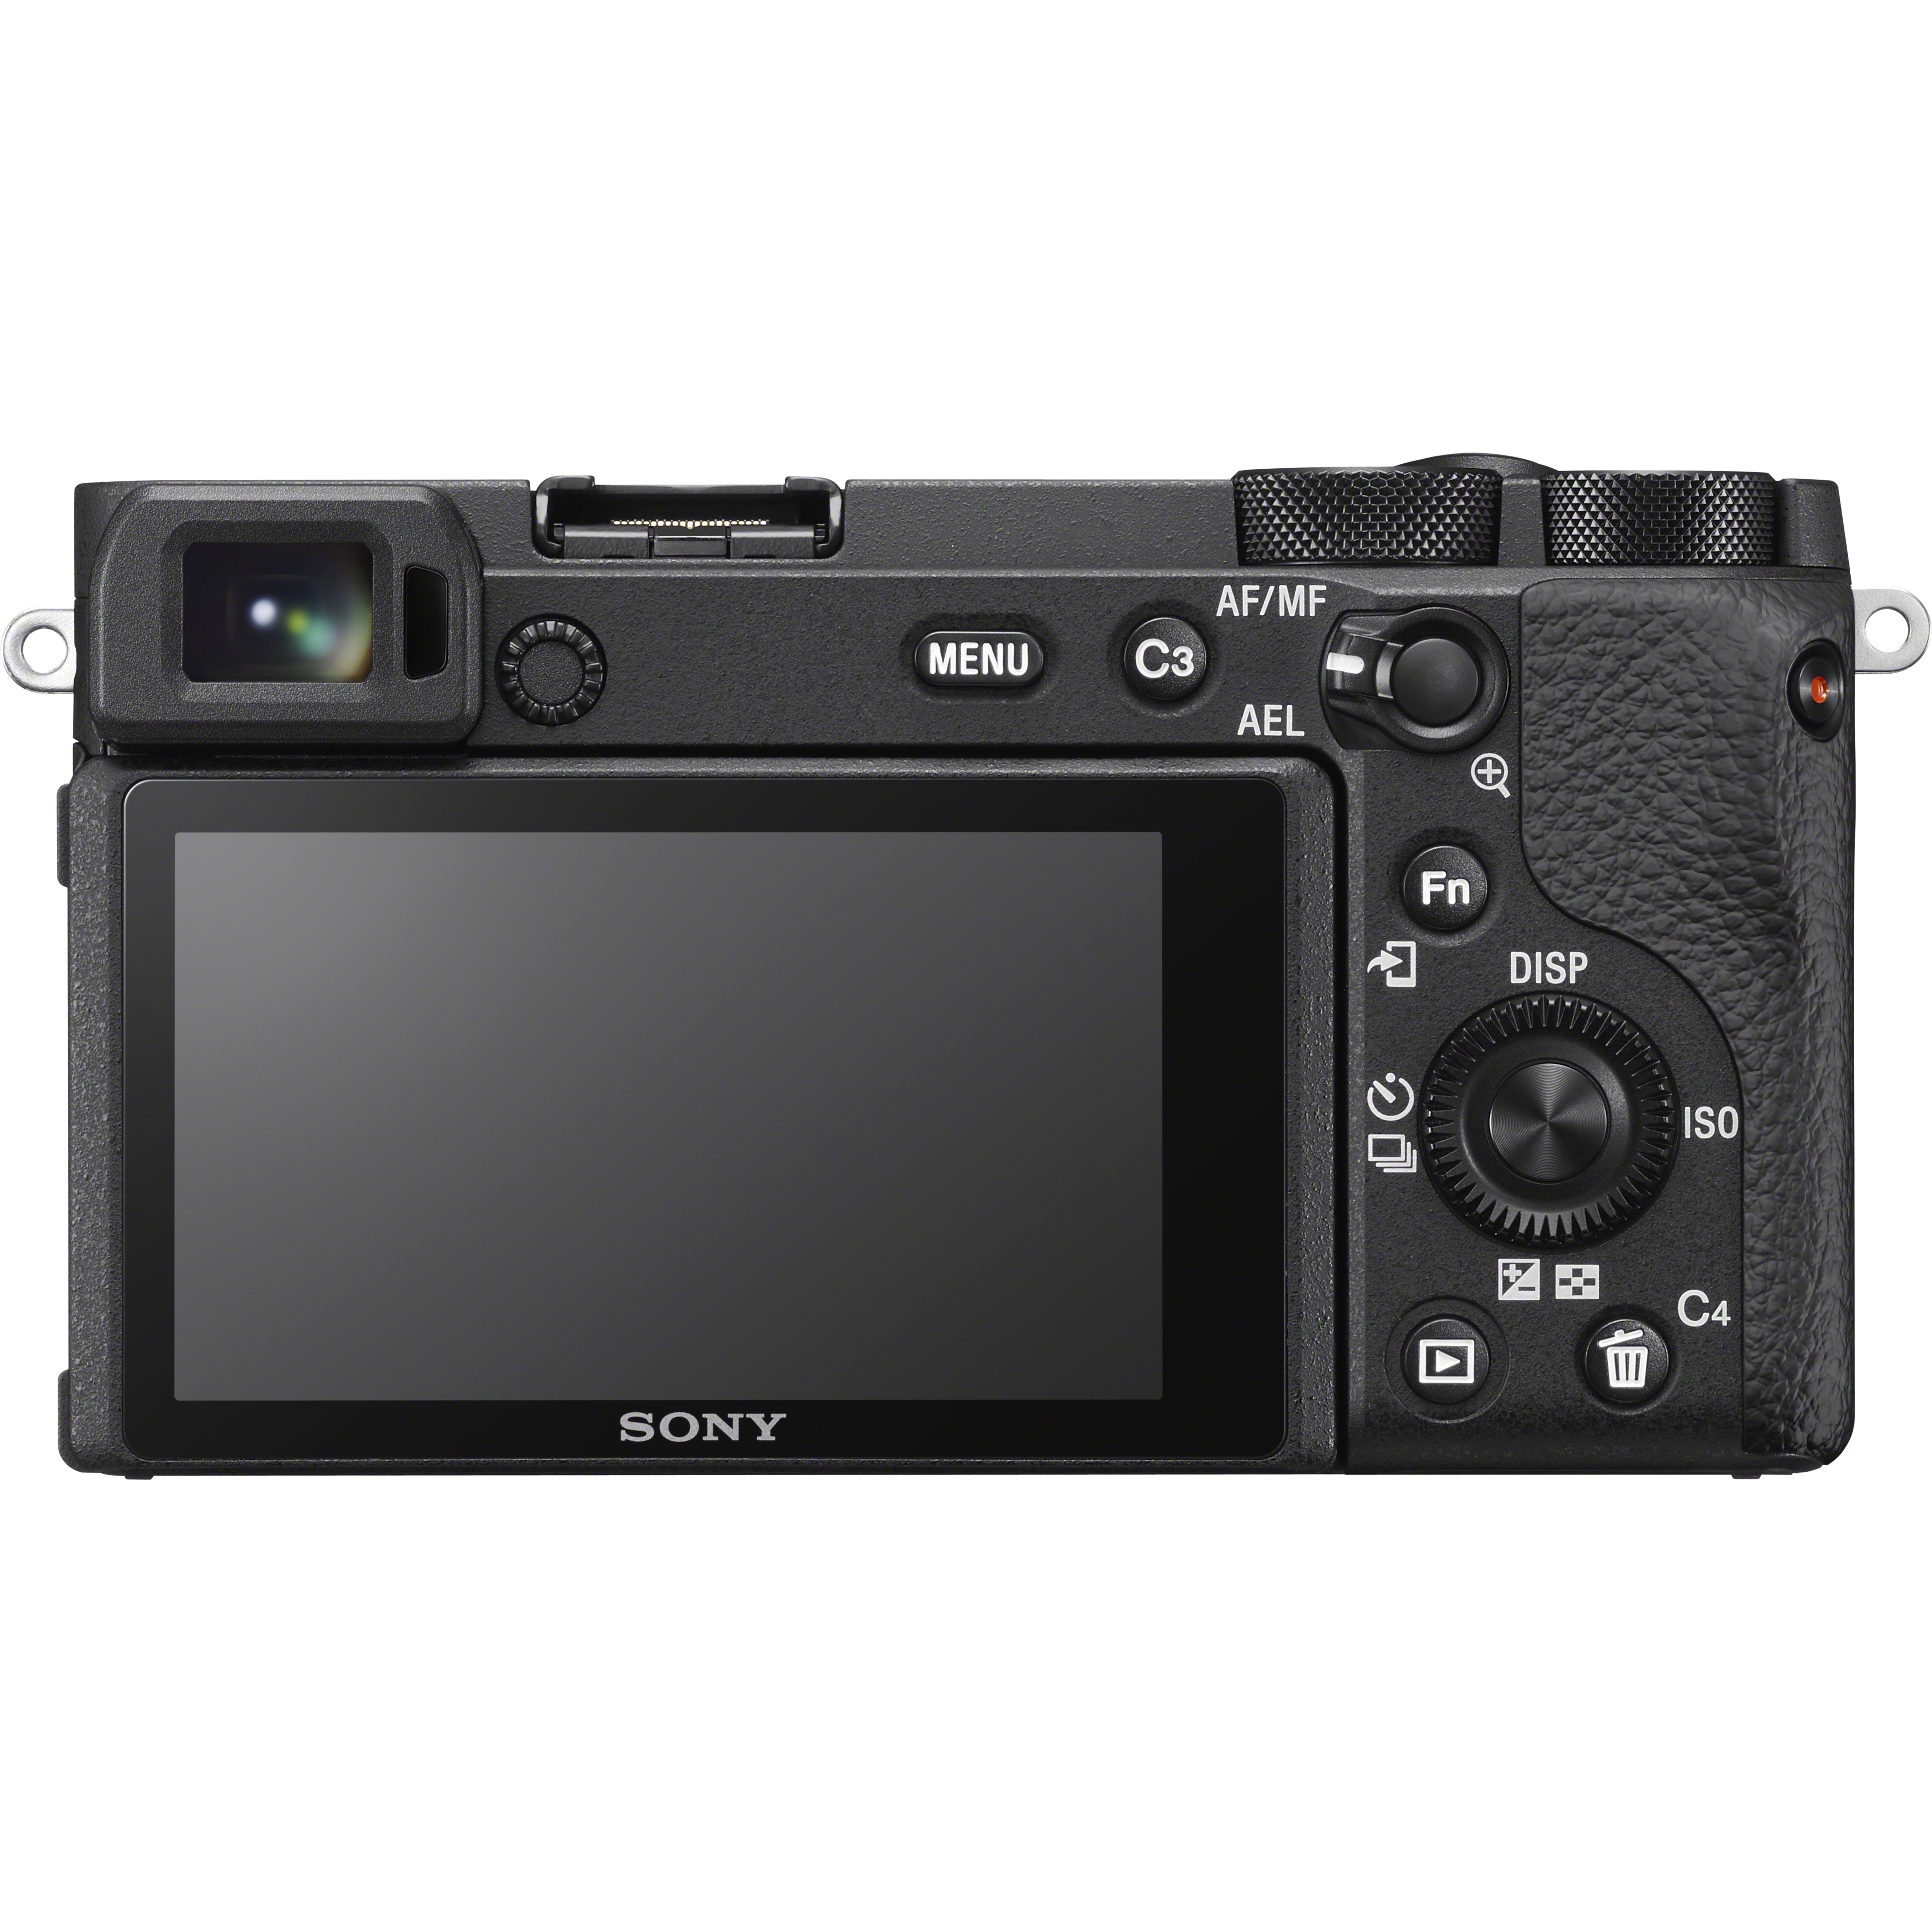 Sony Alpha a6600 24.2 Megapixel Mirrorless Camera Body Only, Black - image 5 of 13